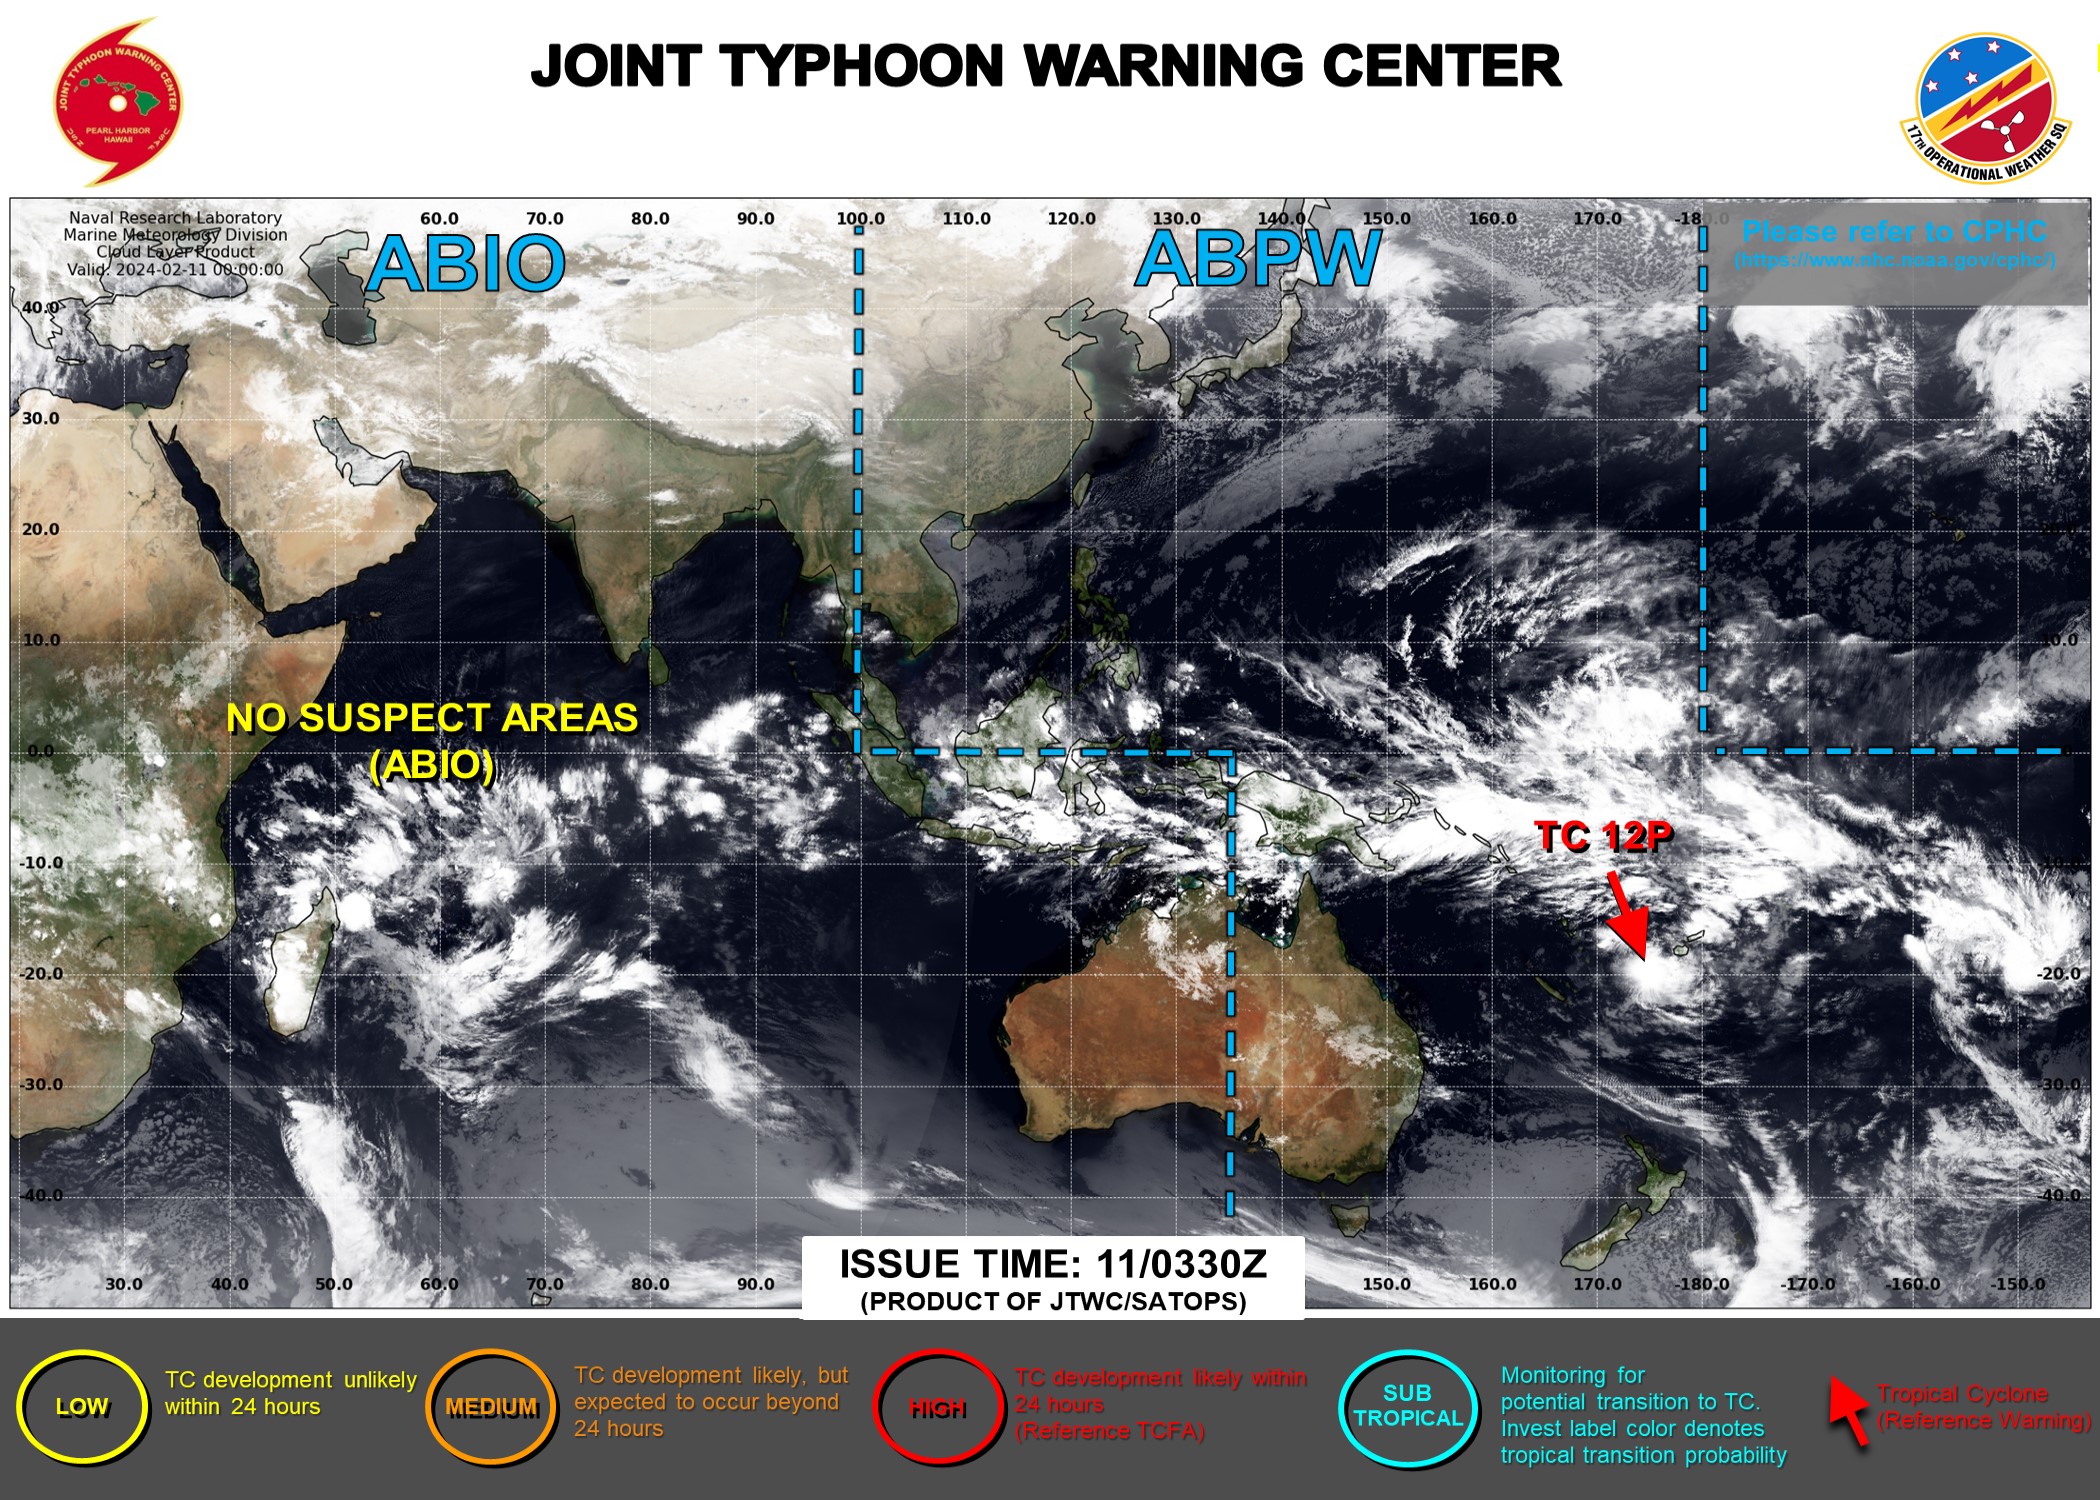 JTWC IS ISSUING 6HOURLY WARNINGS AND 3HOURLY SATELLITE BULLETINS ON TC 12P.